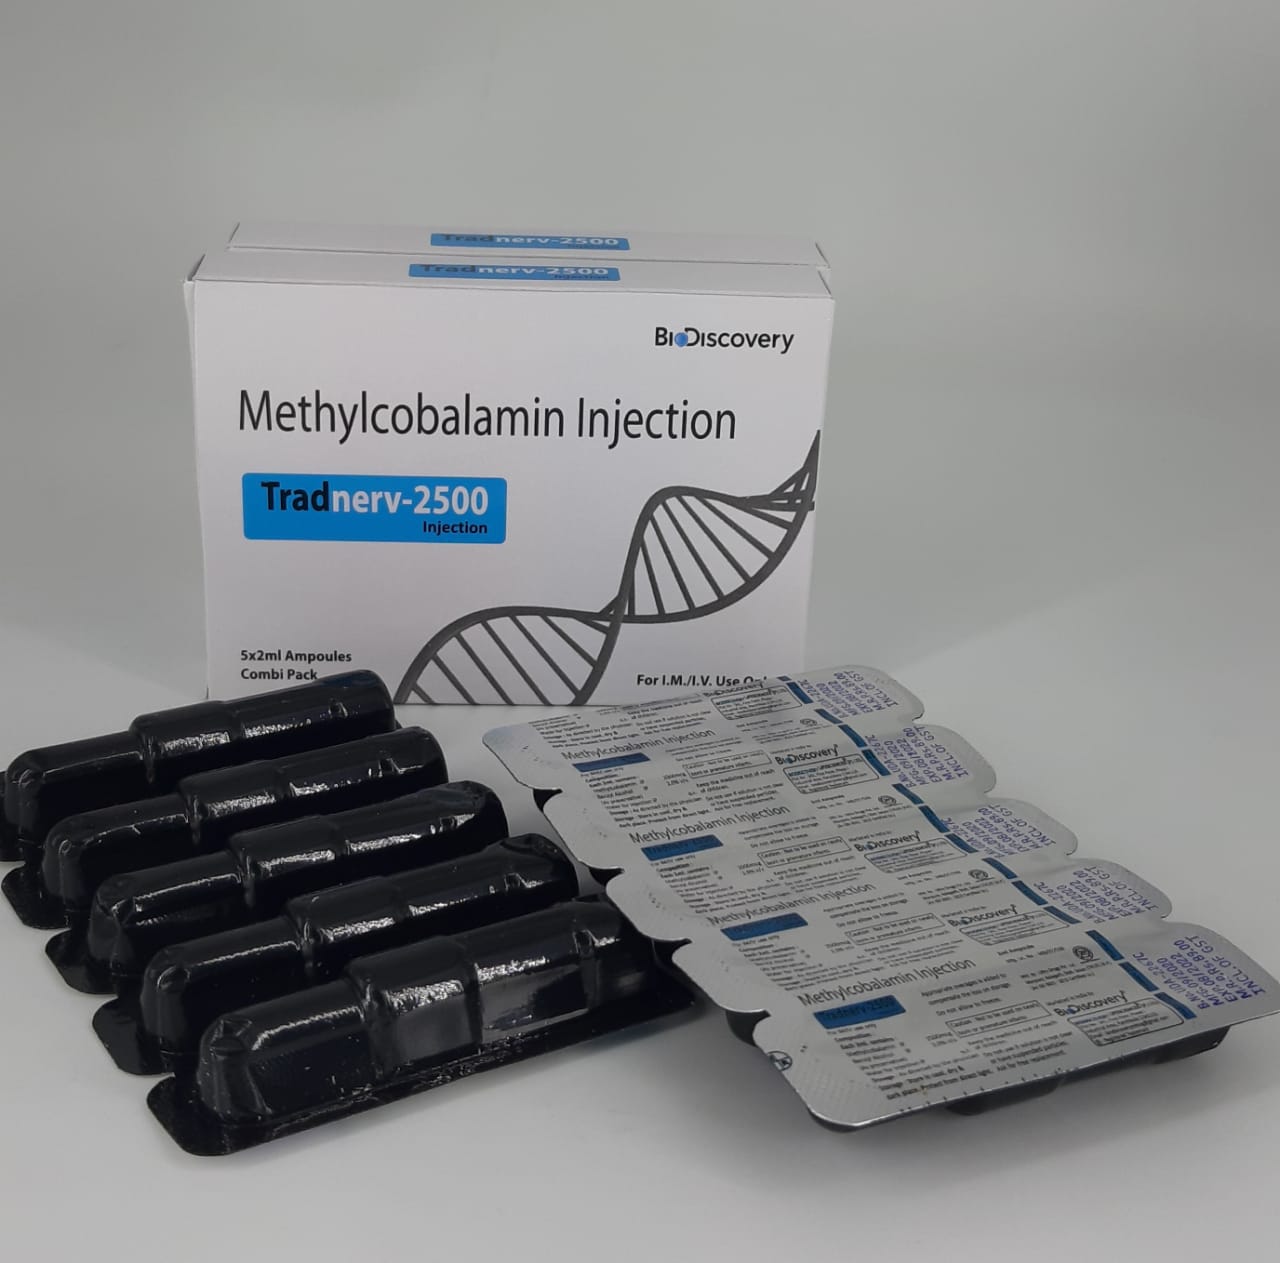 Product Name: Tradnerv 2500, Compositions of Tradnerv 2500 are Methylcobalamin Injection - Biodiscovery Lifesciences Pvt Ltd